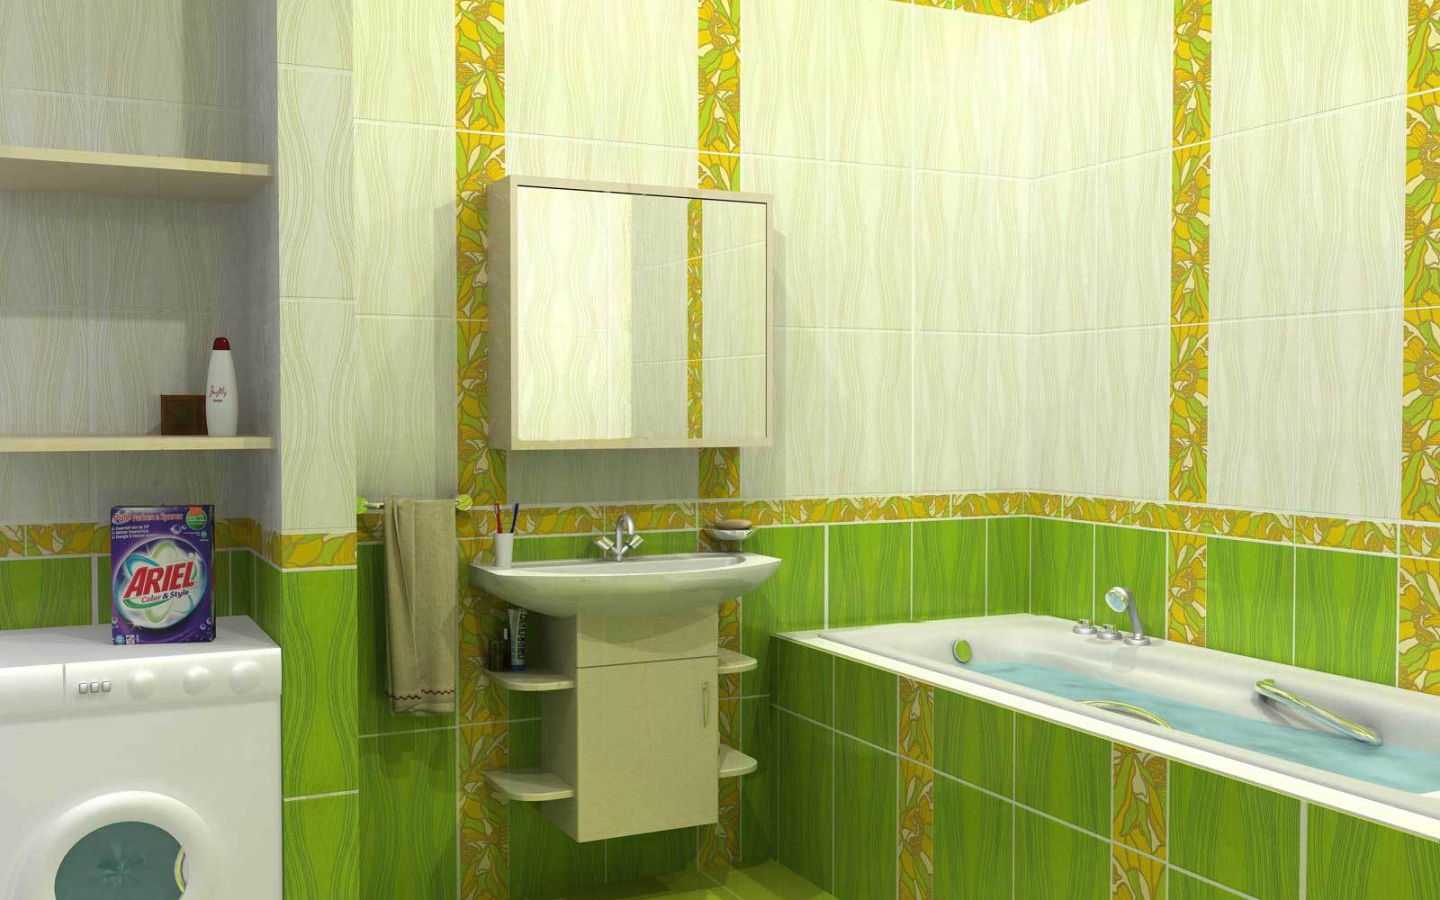 Green and white tiles in the bathroom